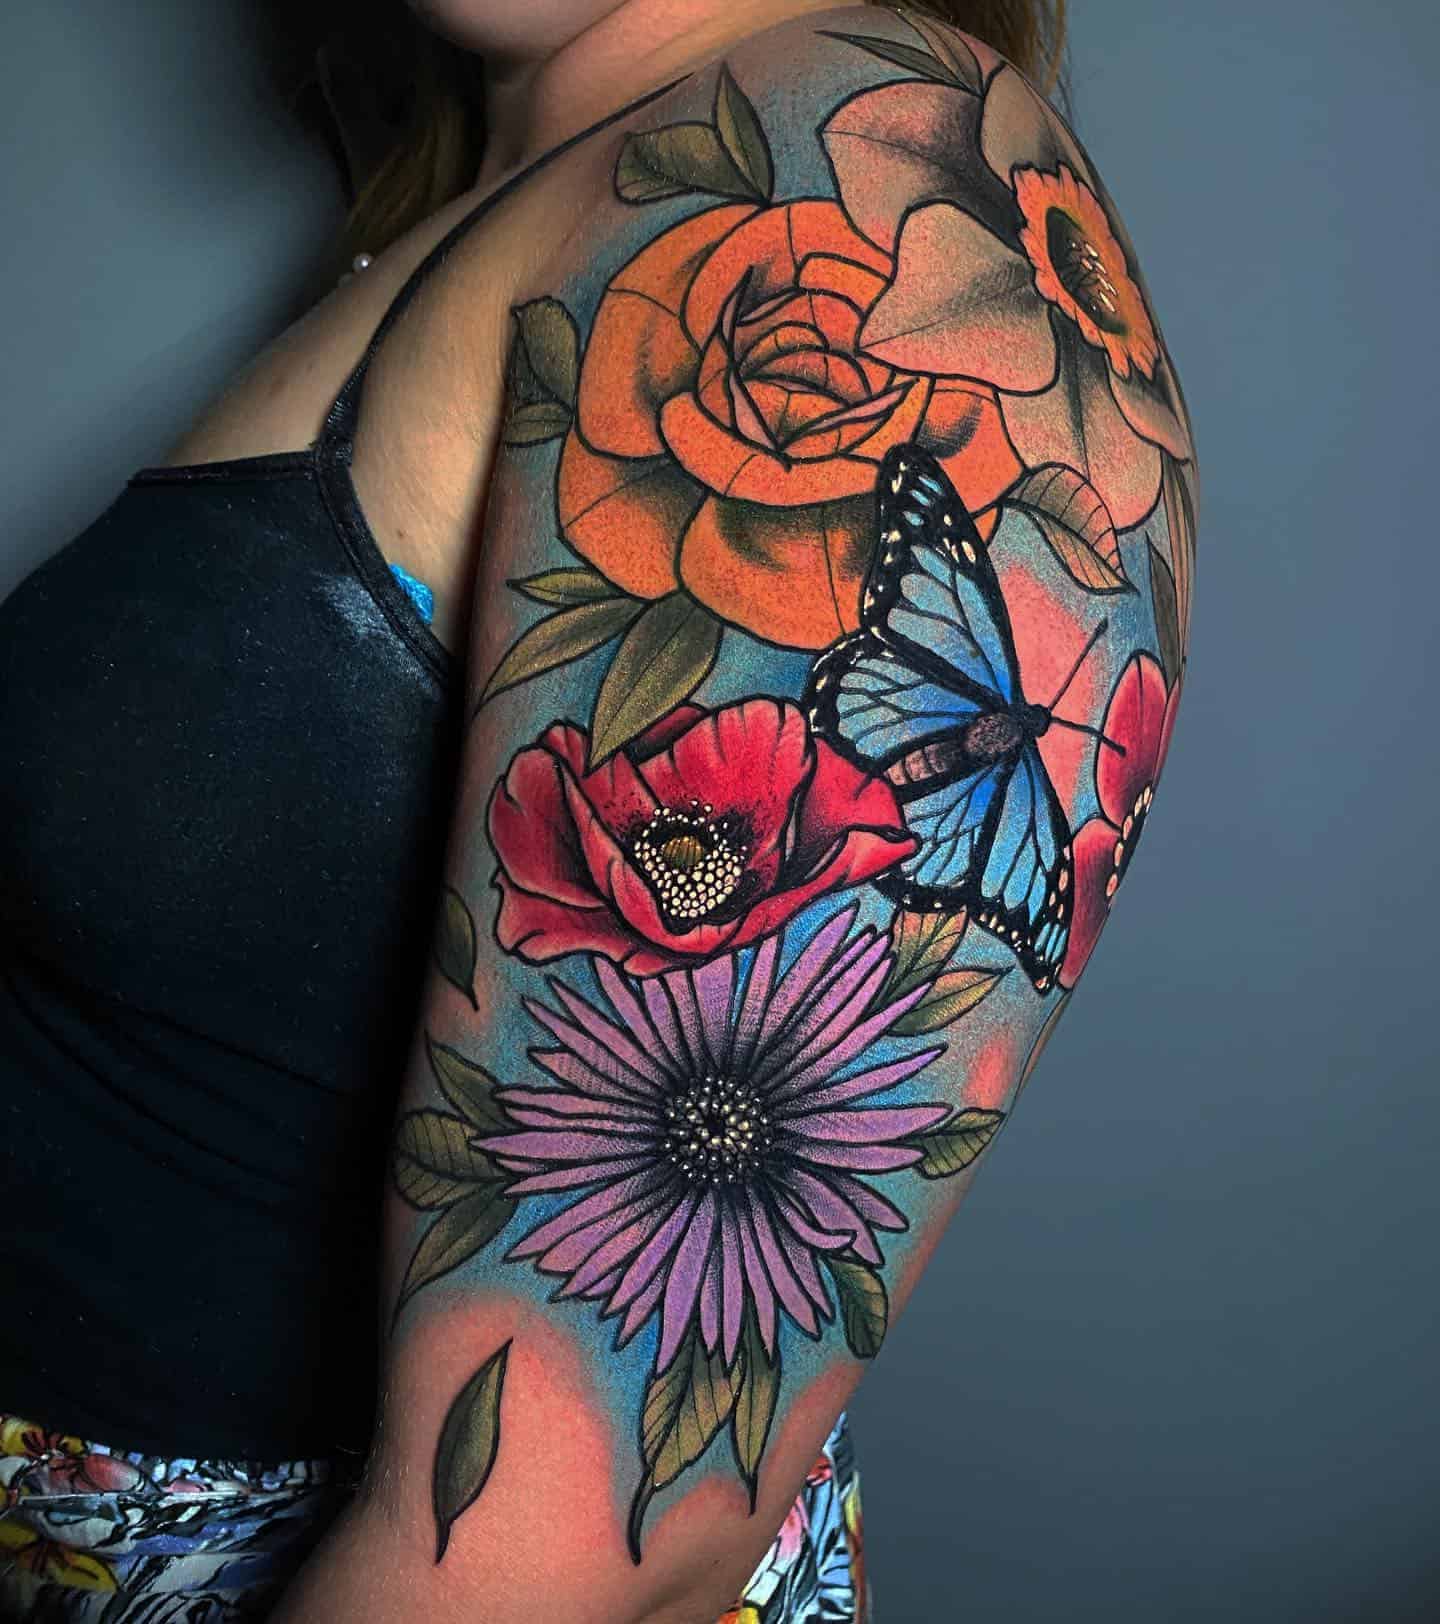 Details more than 94 colorful tattoos for women latest  thtantai2